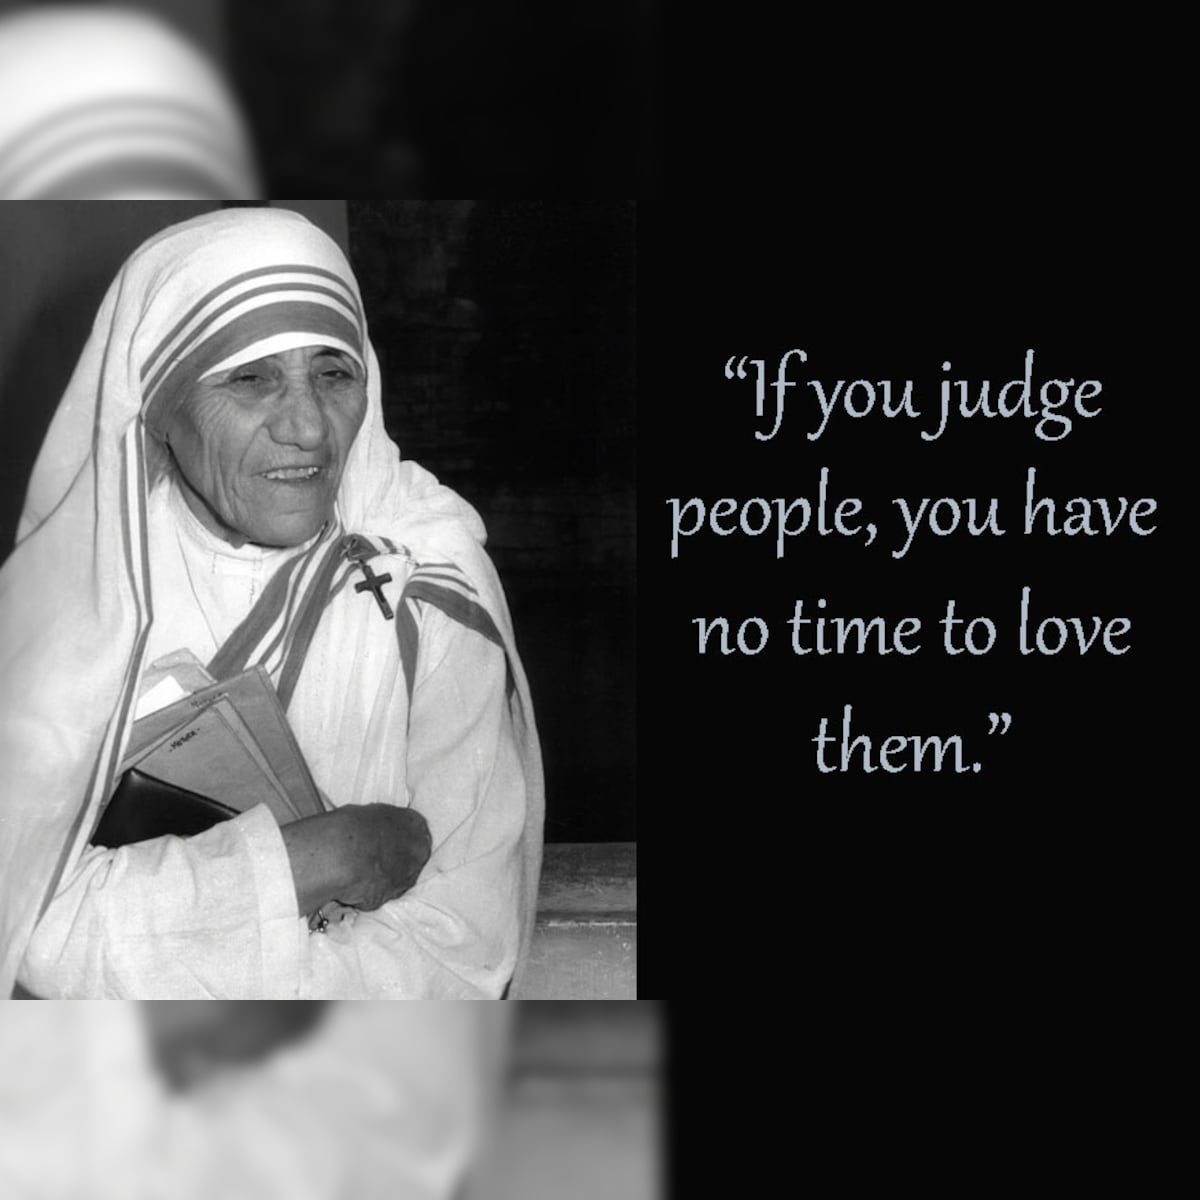 Mother Teresa's 110Th Birth Anniversary: Inspiring Quotes